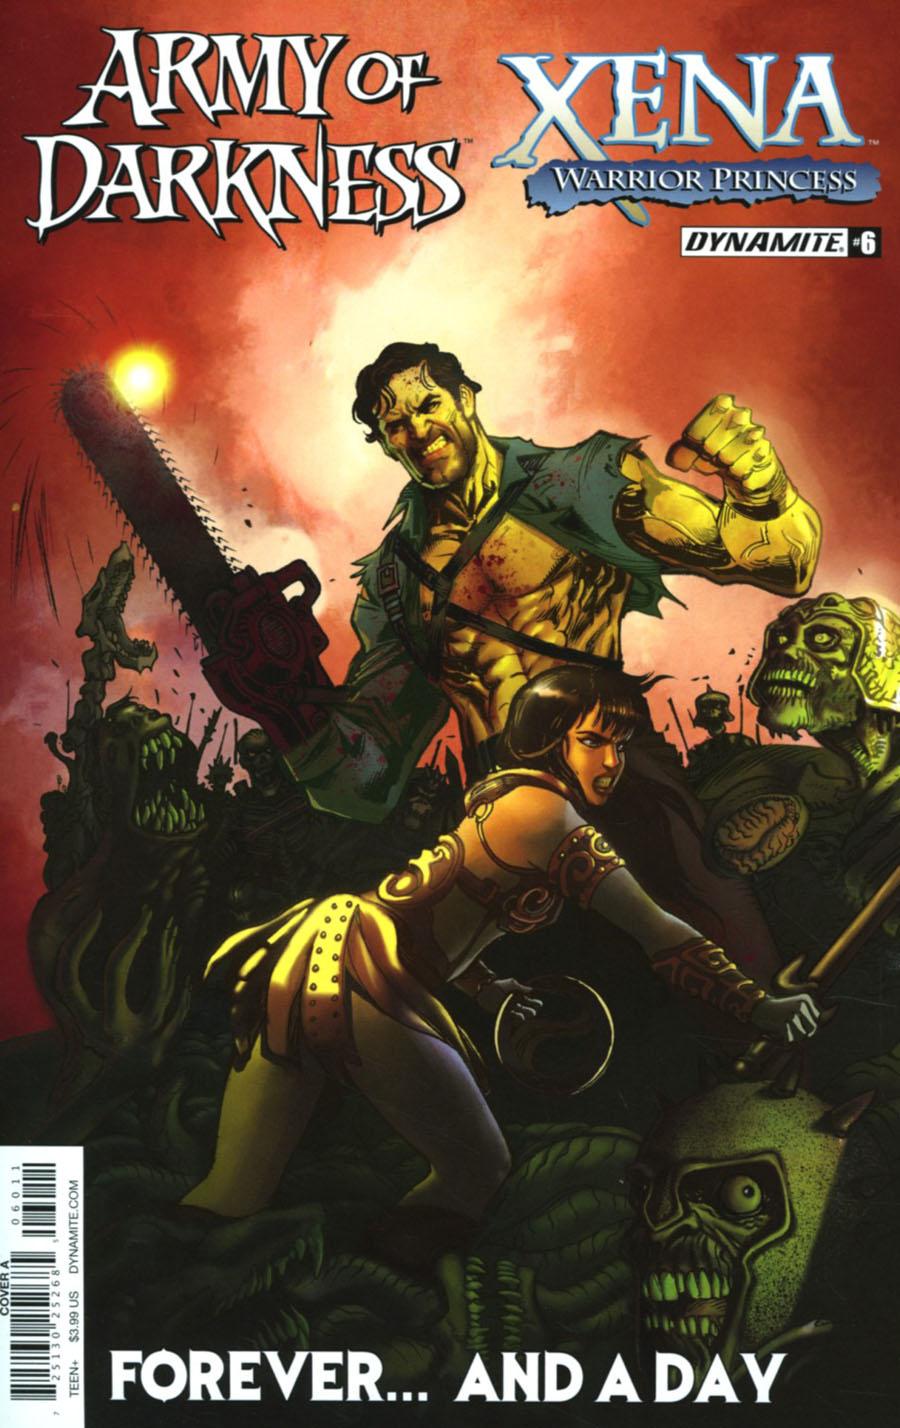 Army Of Darkness Xena Forever And A Day Vol. 1 #6